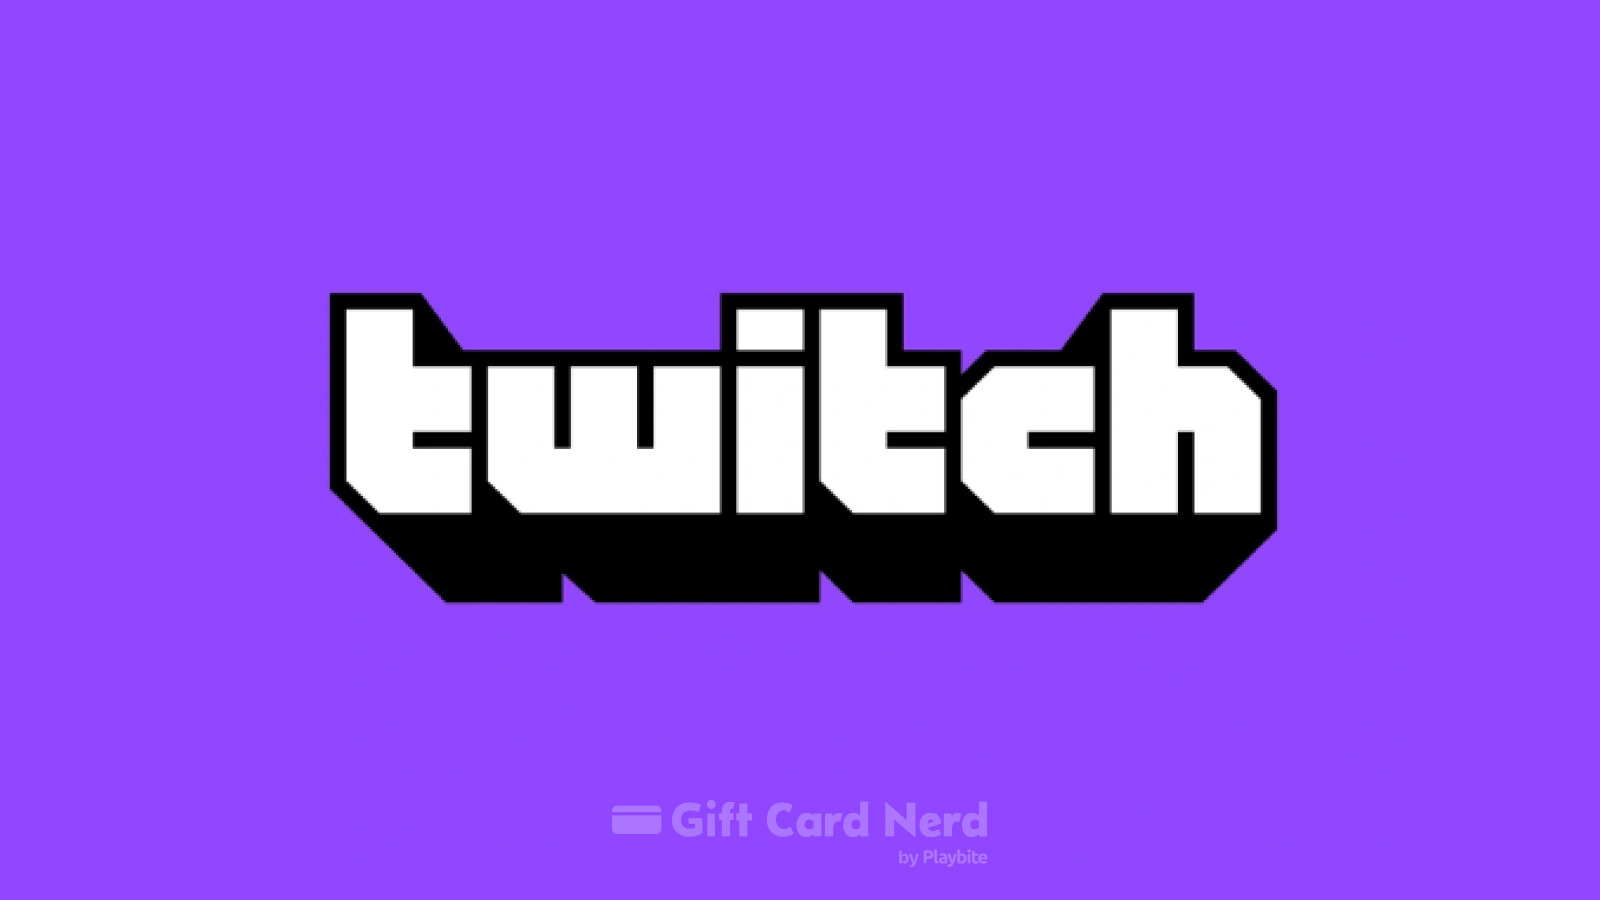 Does Amazon sell Twitch gift cards?